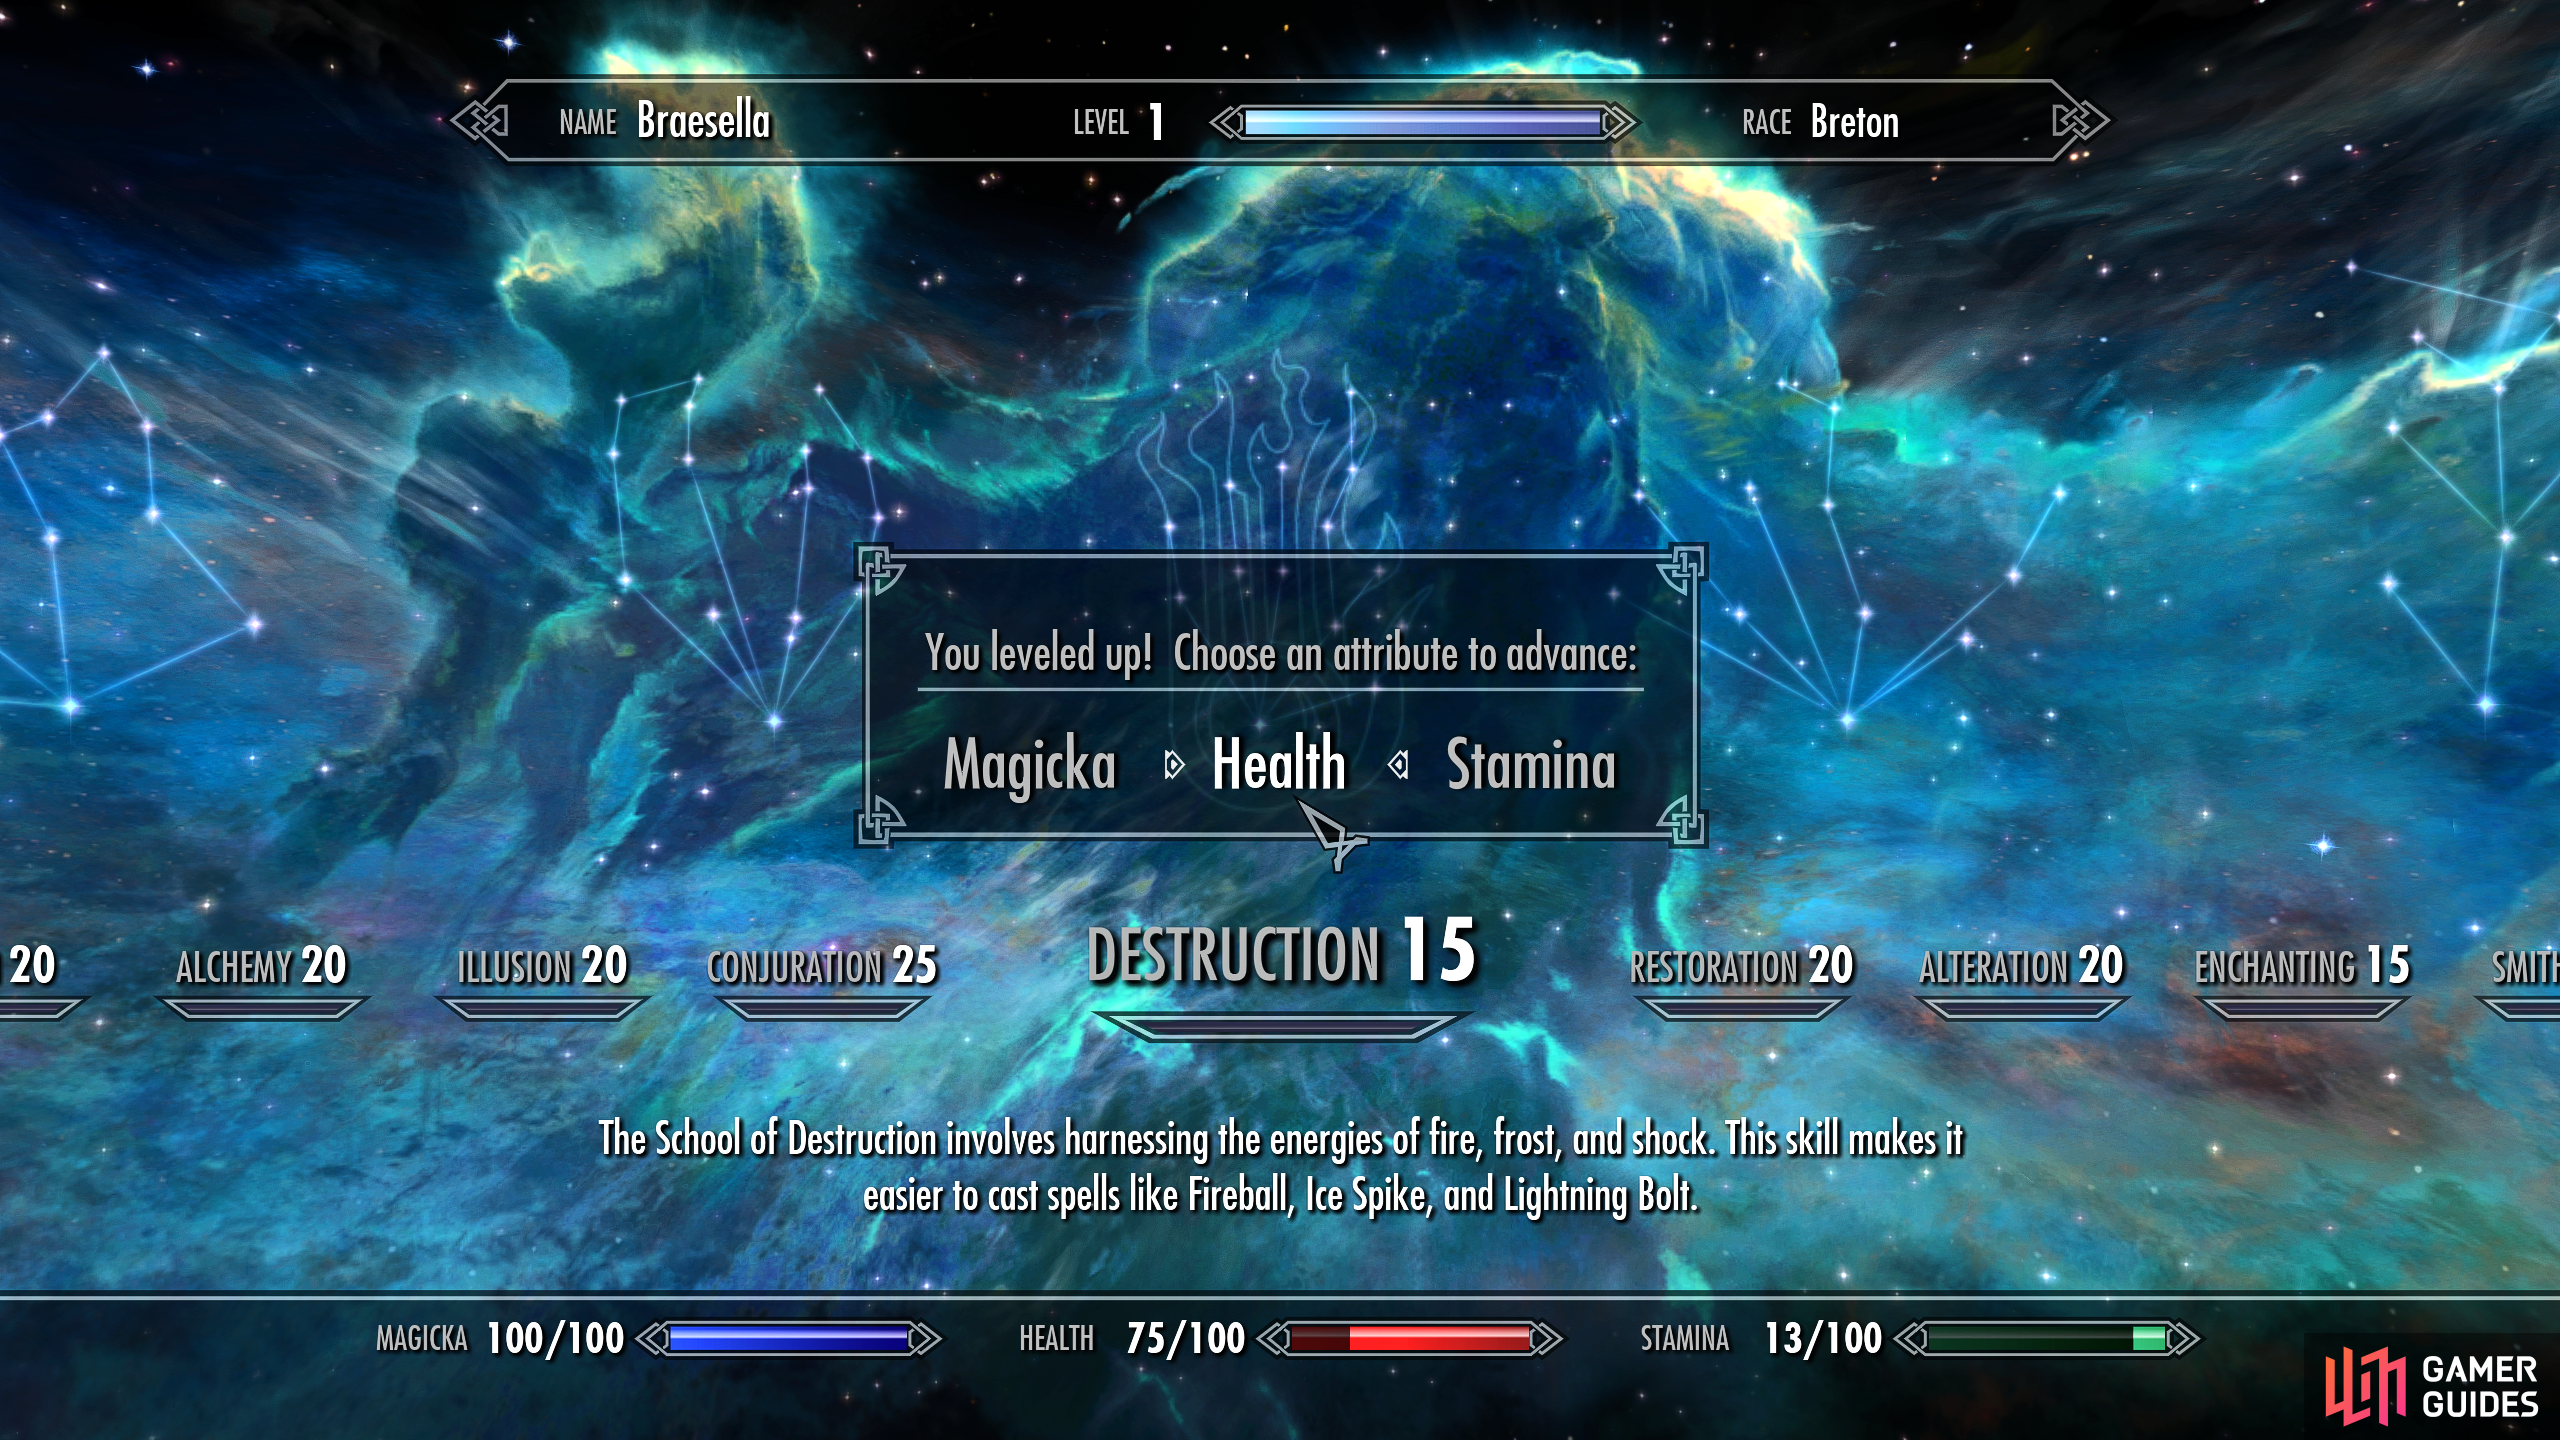 You can distribute attribute points between Magicka, Health, and Stamina each time you level up.